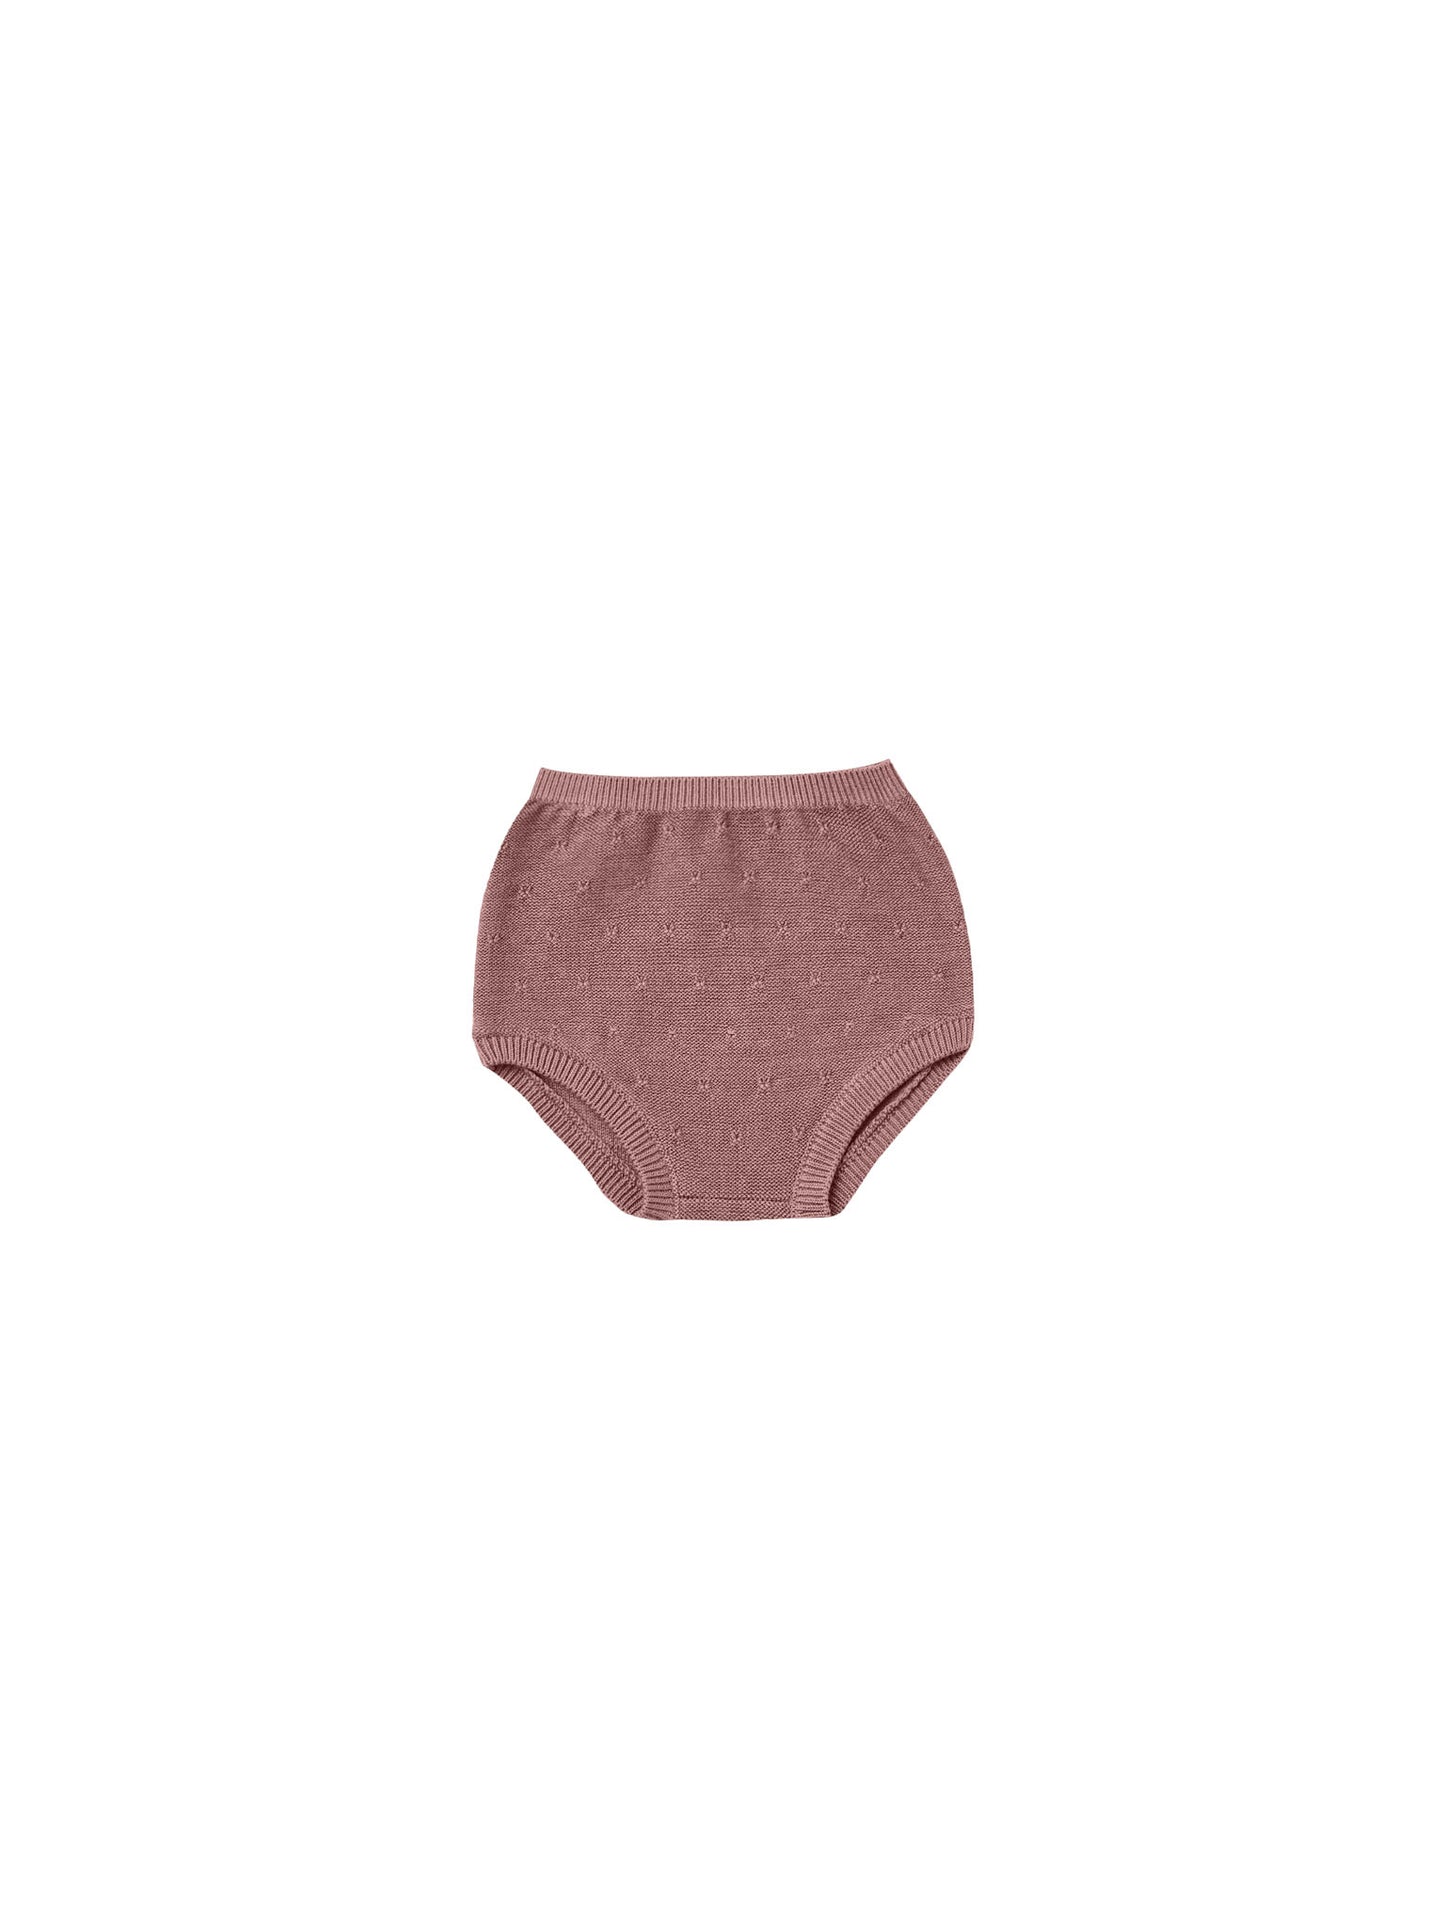 Quincy Mae - Knit Bloomer - Fig